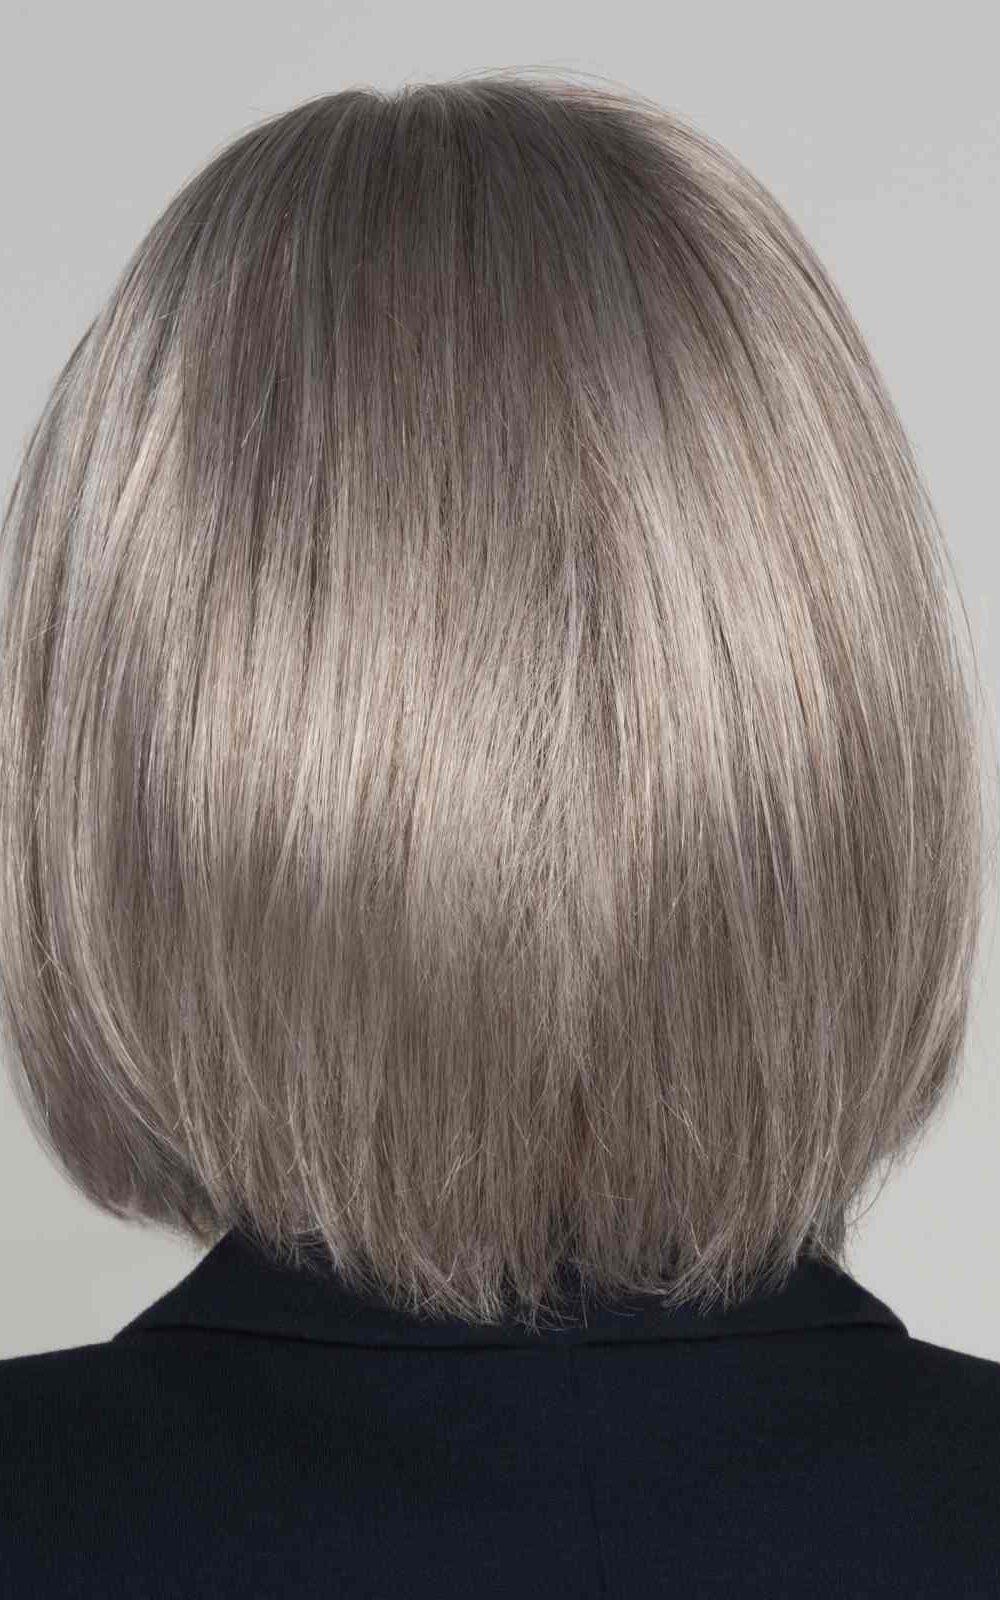 Tempo 100 Deluxe Wig by Ellen Wille | Ready-to-wear synthetic hair looks more like natural hair | Elly-K.com.au